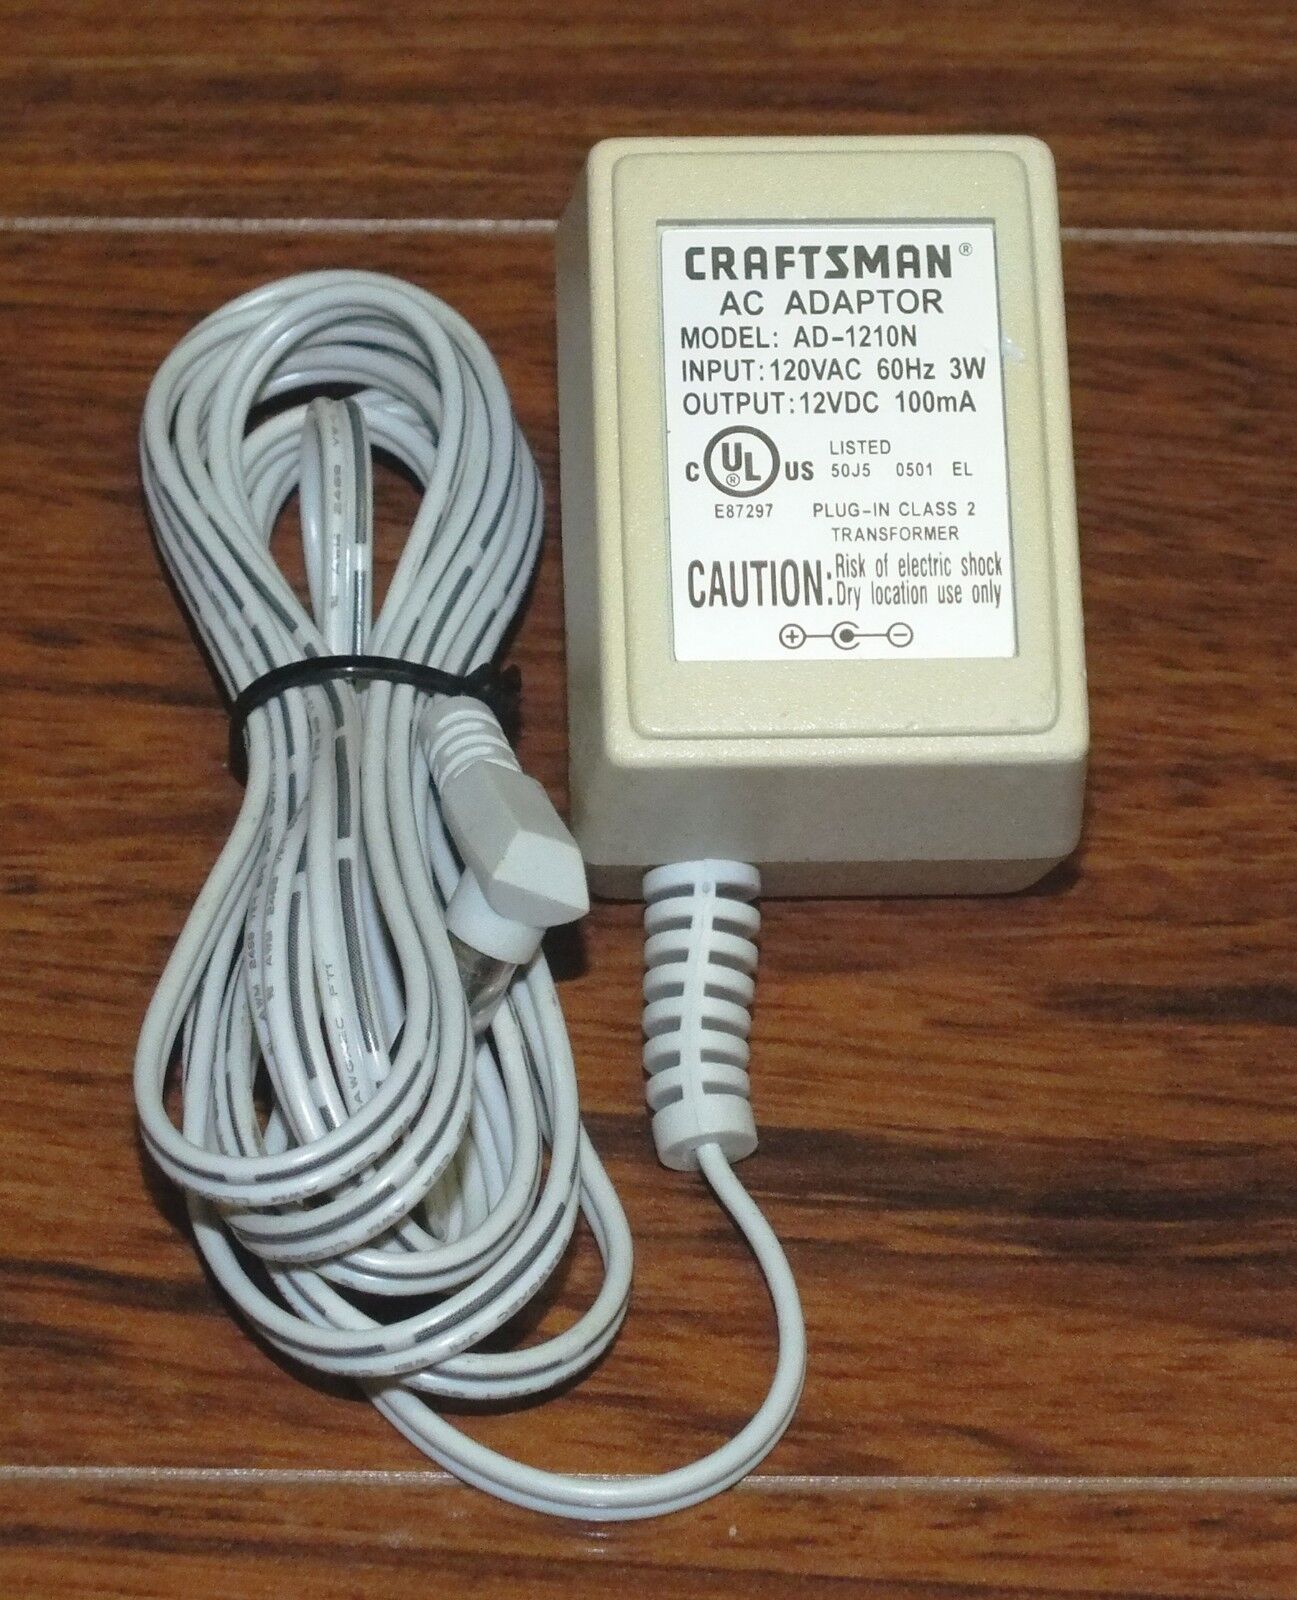 *Brand NEW*Craftsman 12VDC 100mA AD-1210N AC DC ADAPTER POWER SUPPLY